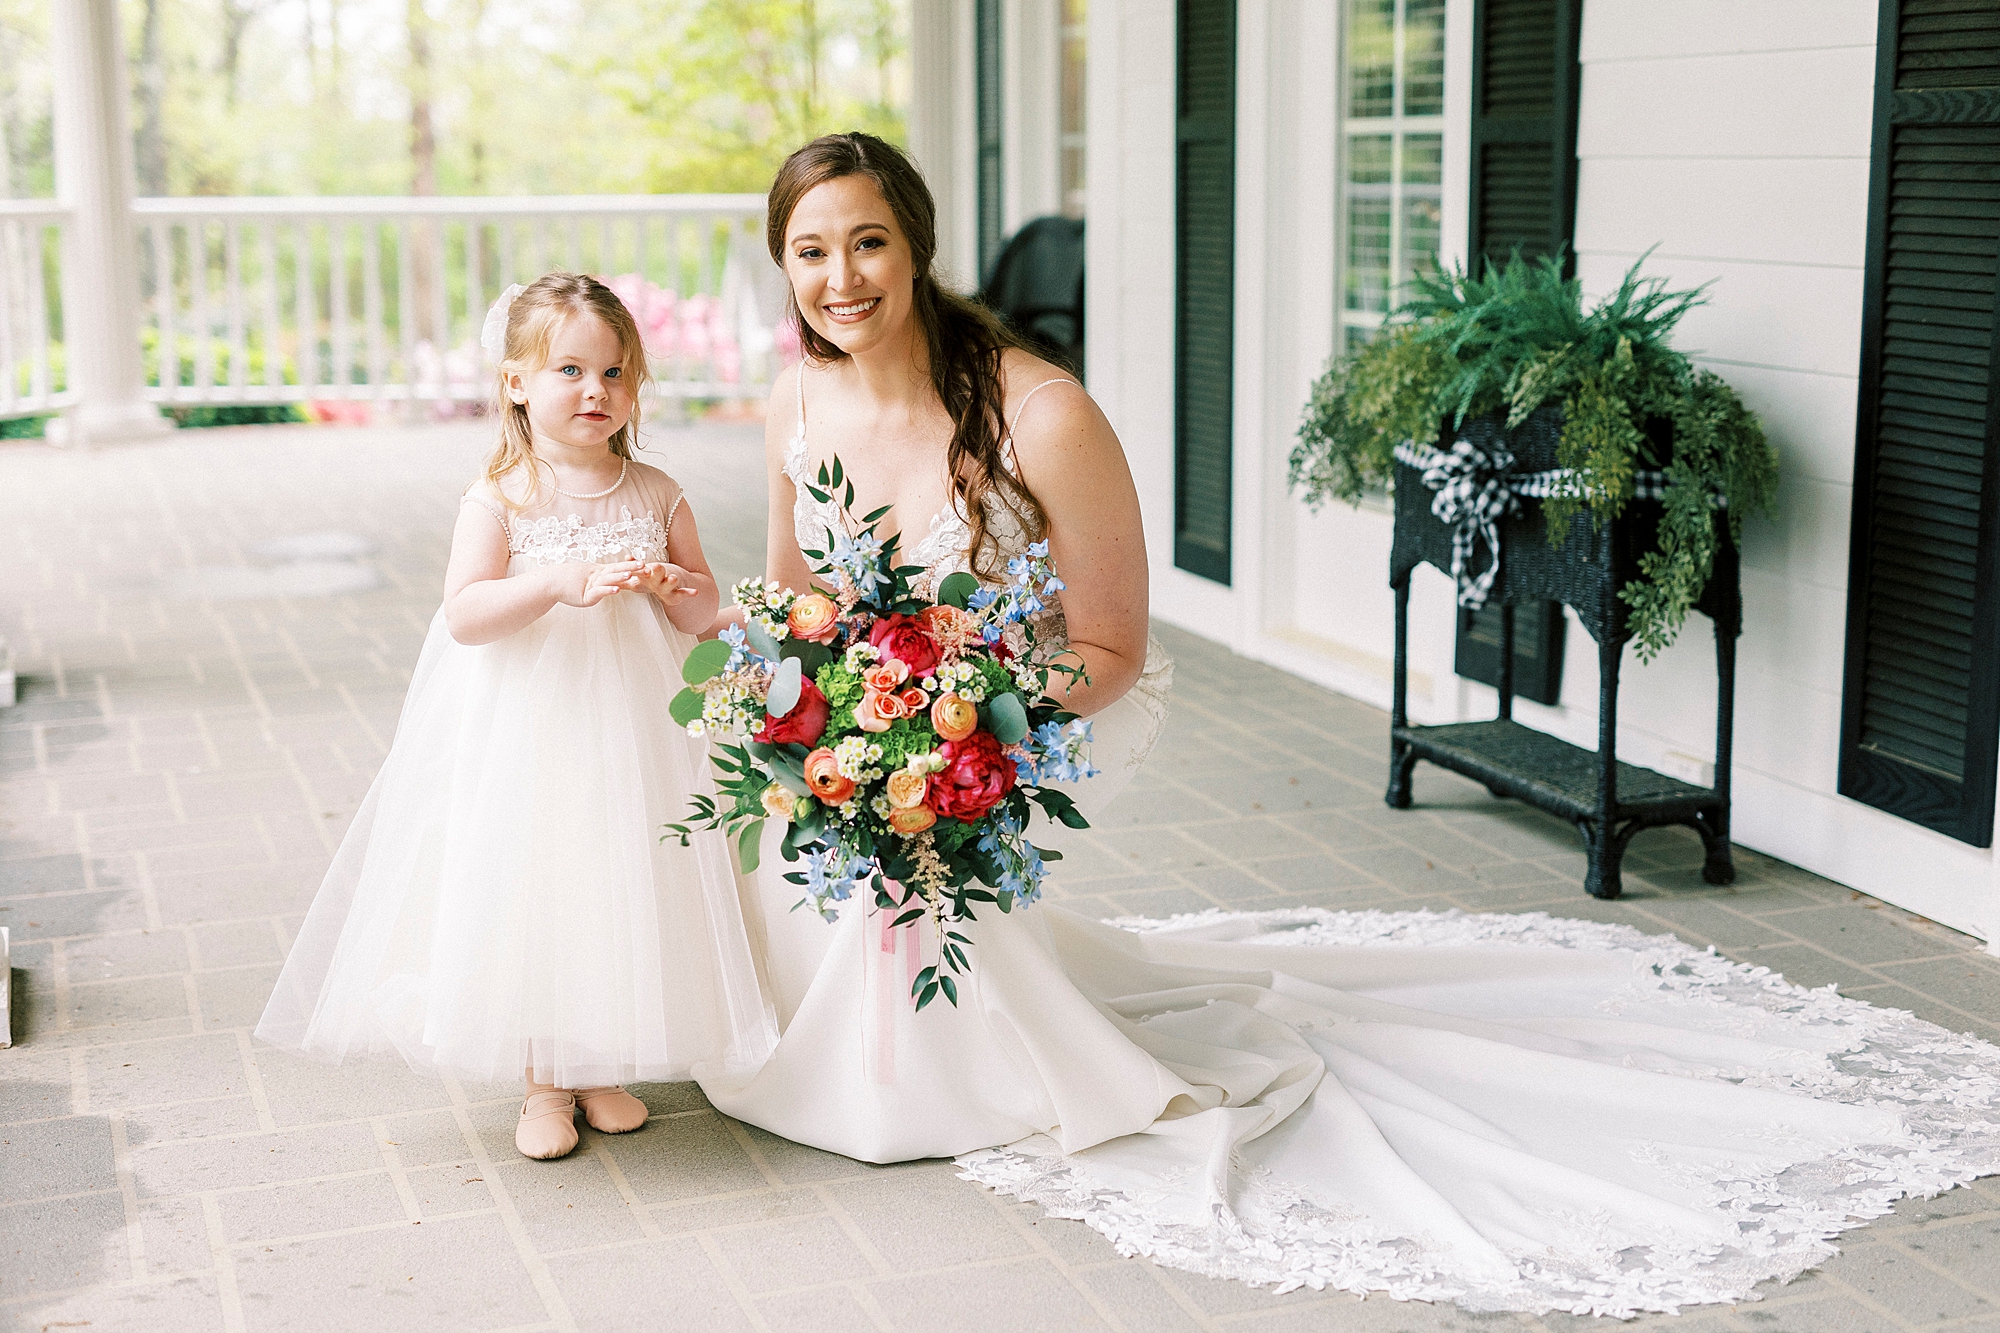 bride with bright bouquet of flowers kneels next to flower girl on porch 